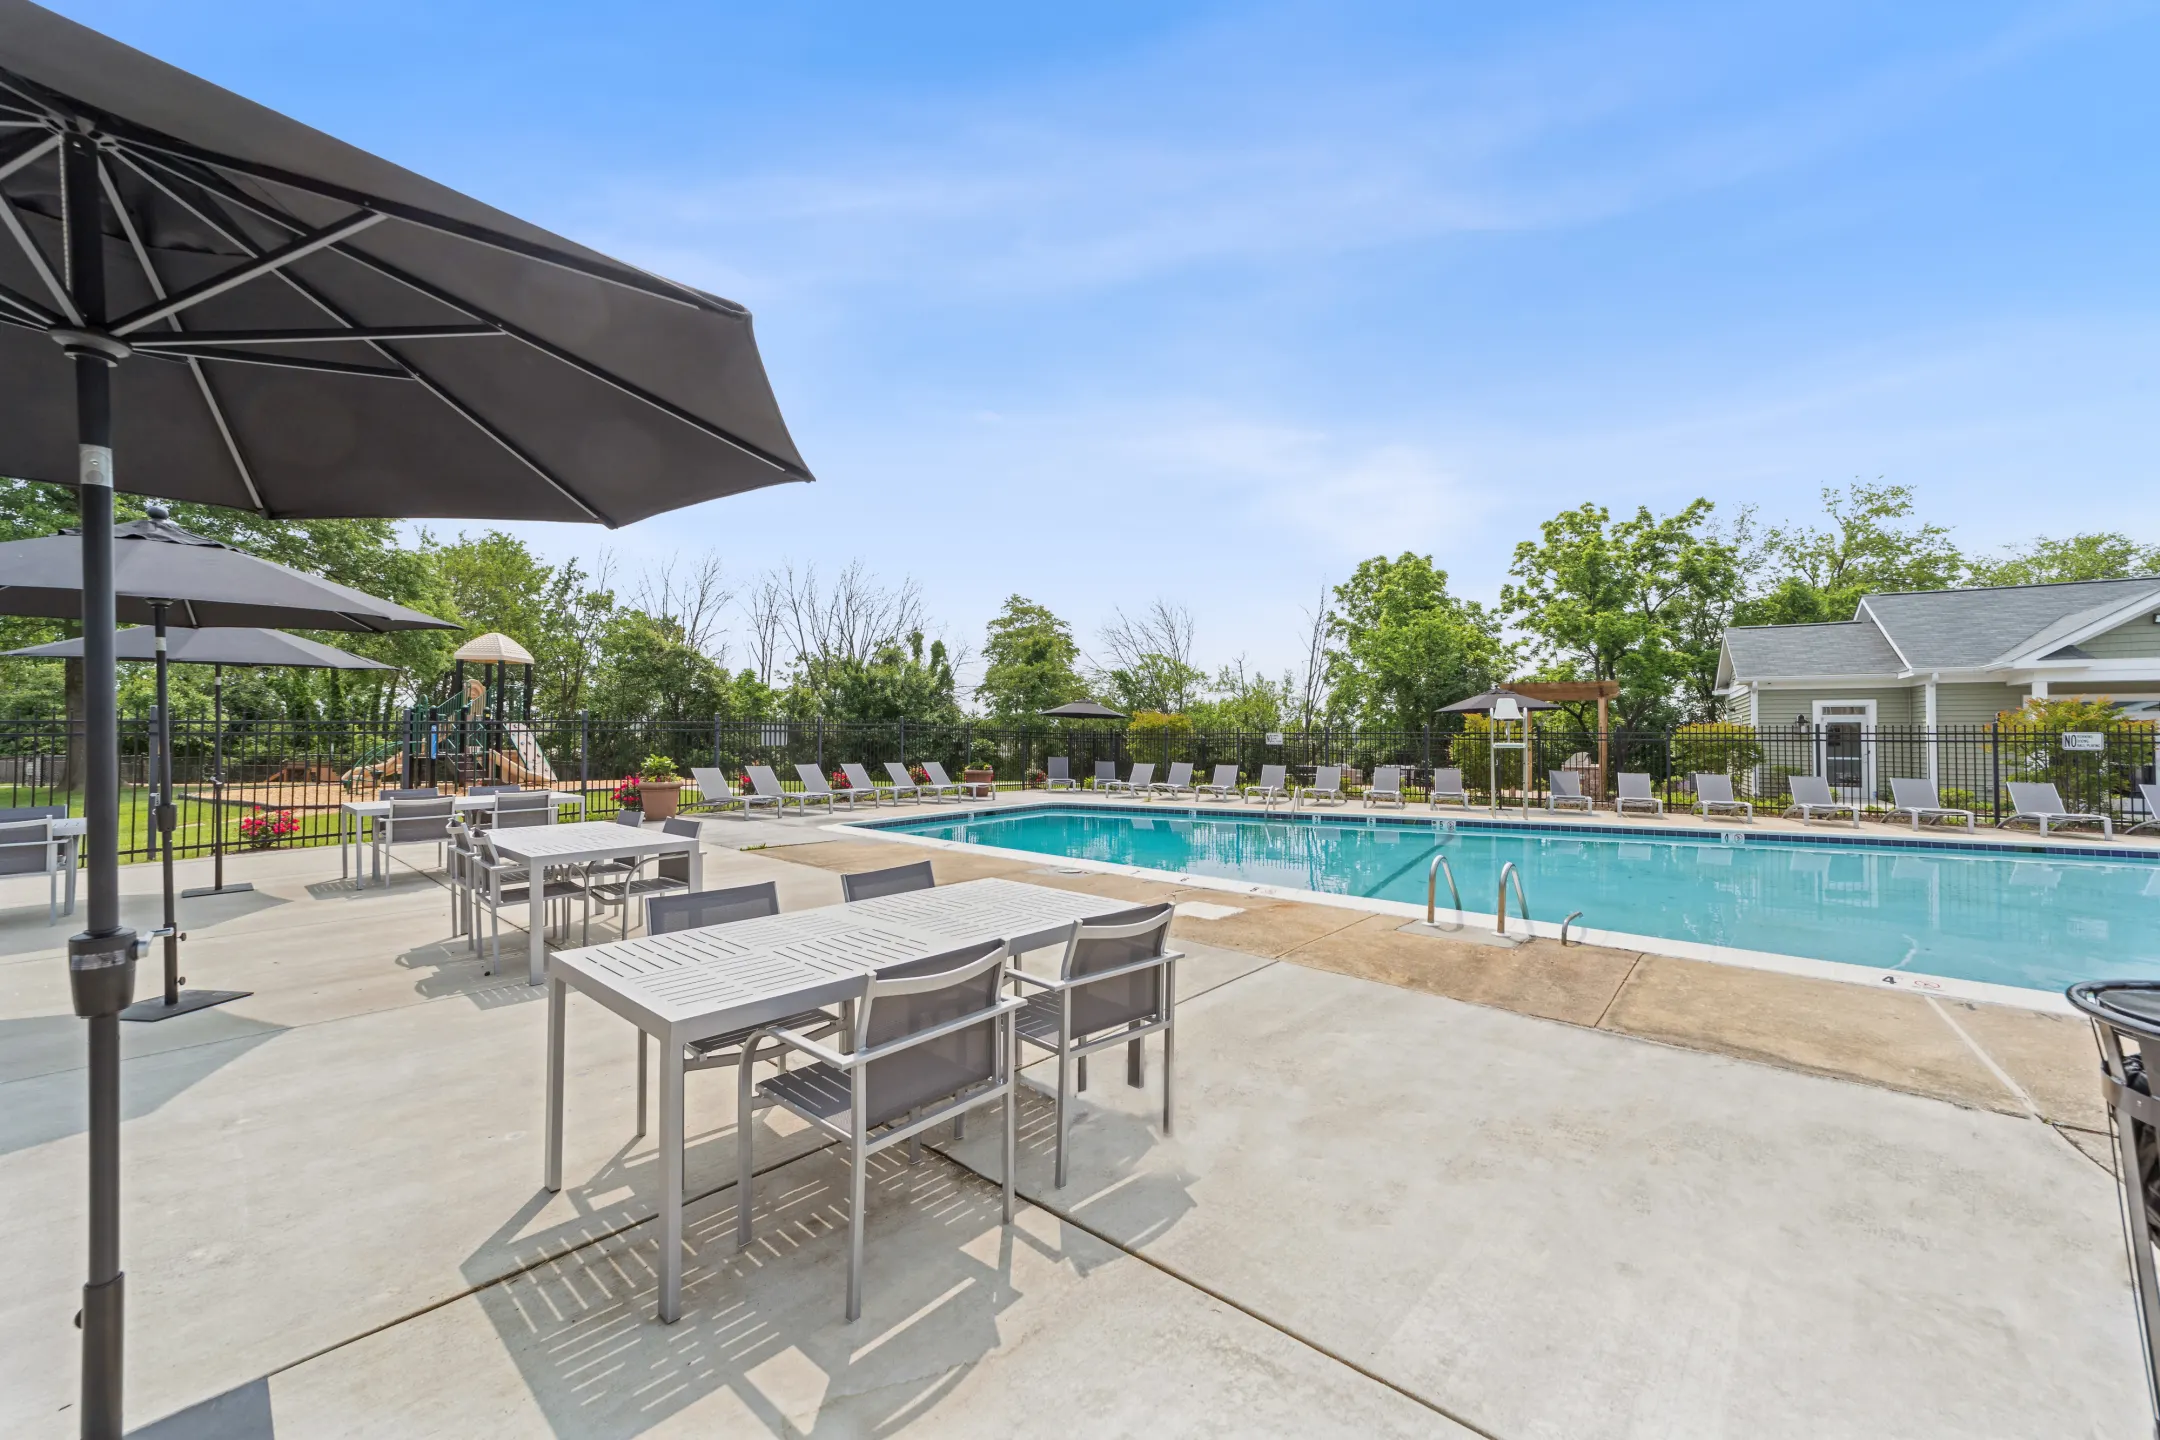 Pool - Satyr Hill Apartments - Parkville, MD